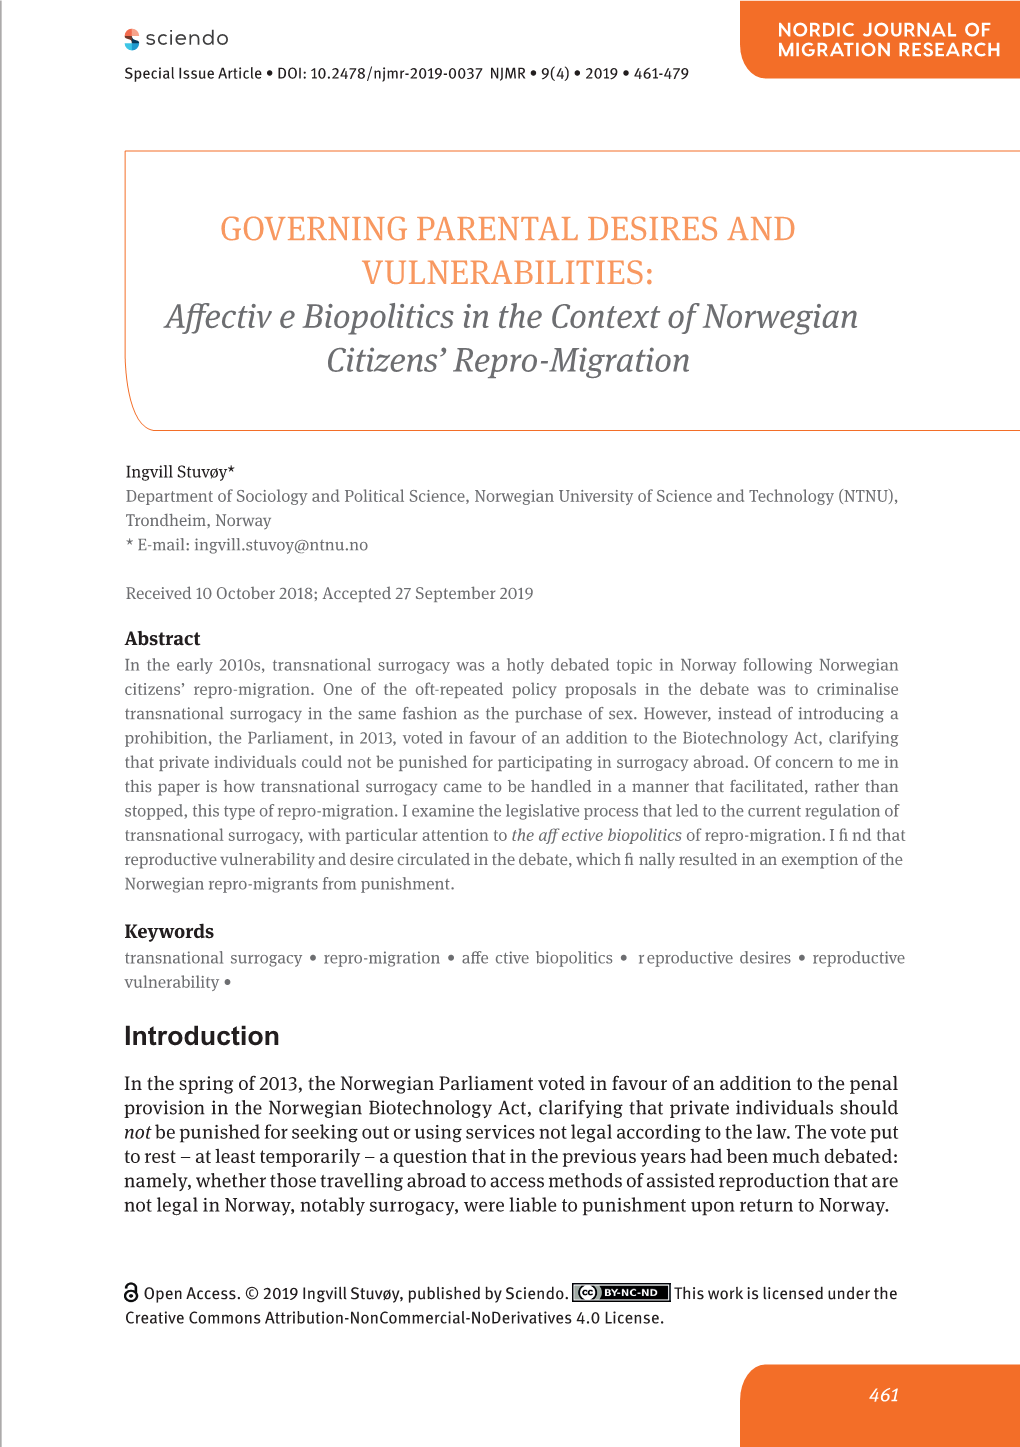 GOVERNING PARENTAL DESIRES and VULNERABILITIES: Affectiv E Biopolitics in the Context of Norwegian Citizens’ Repro-Migration